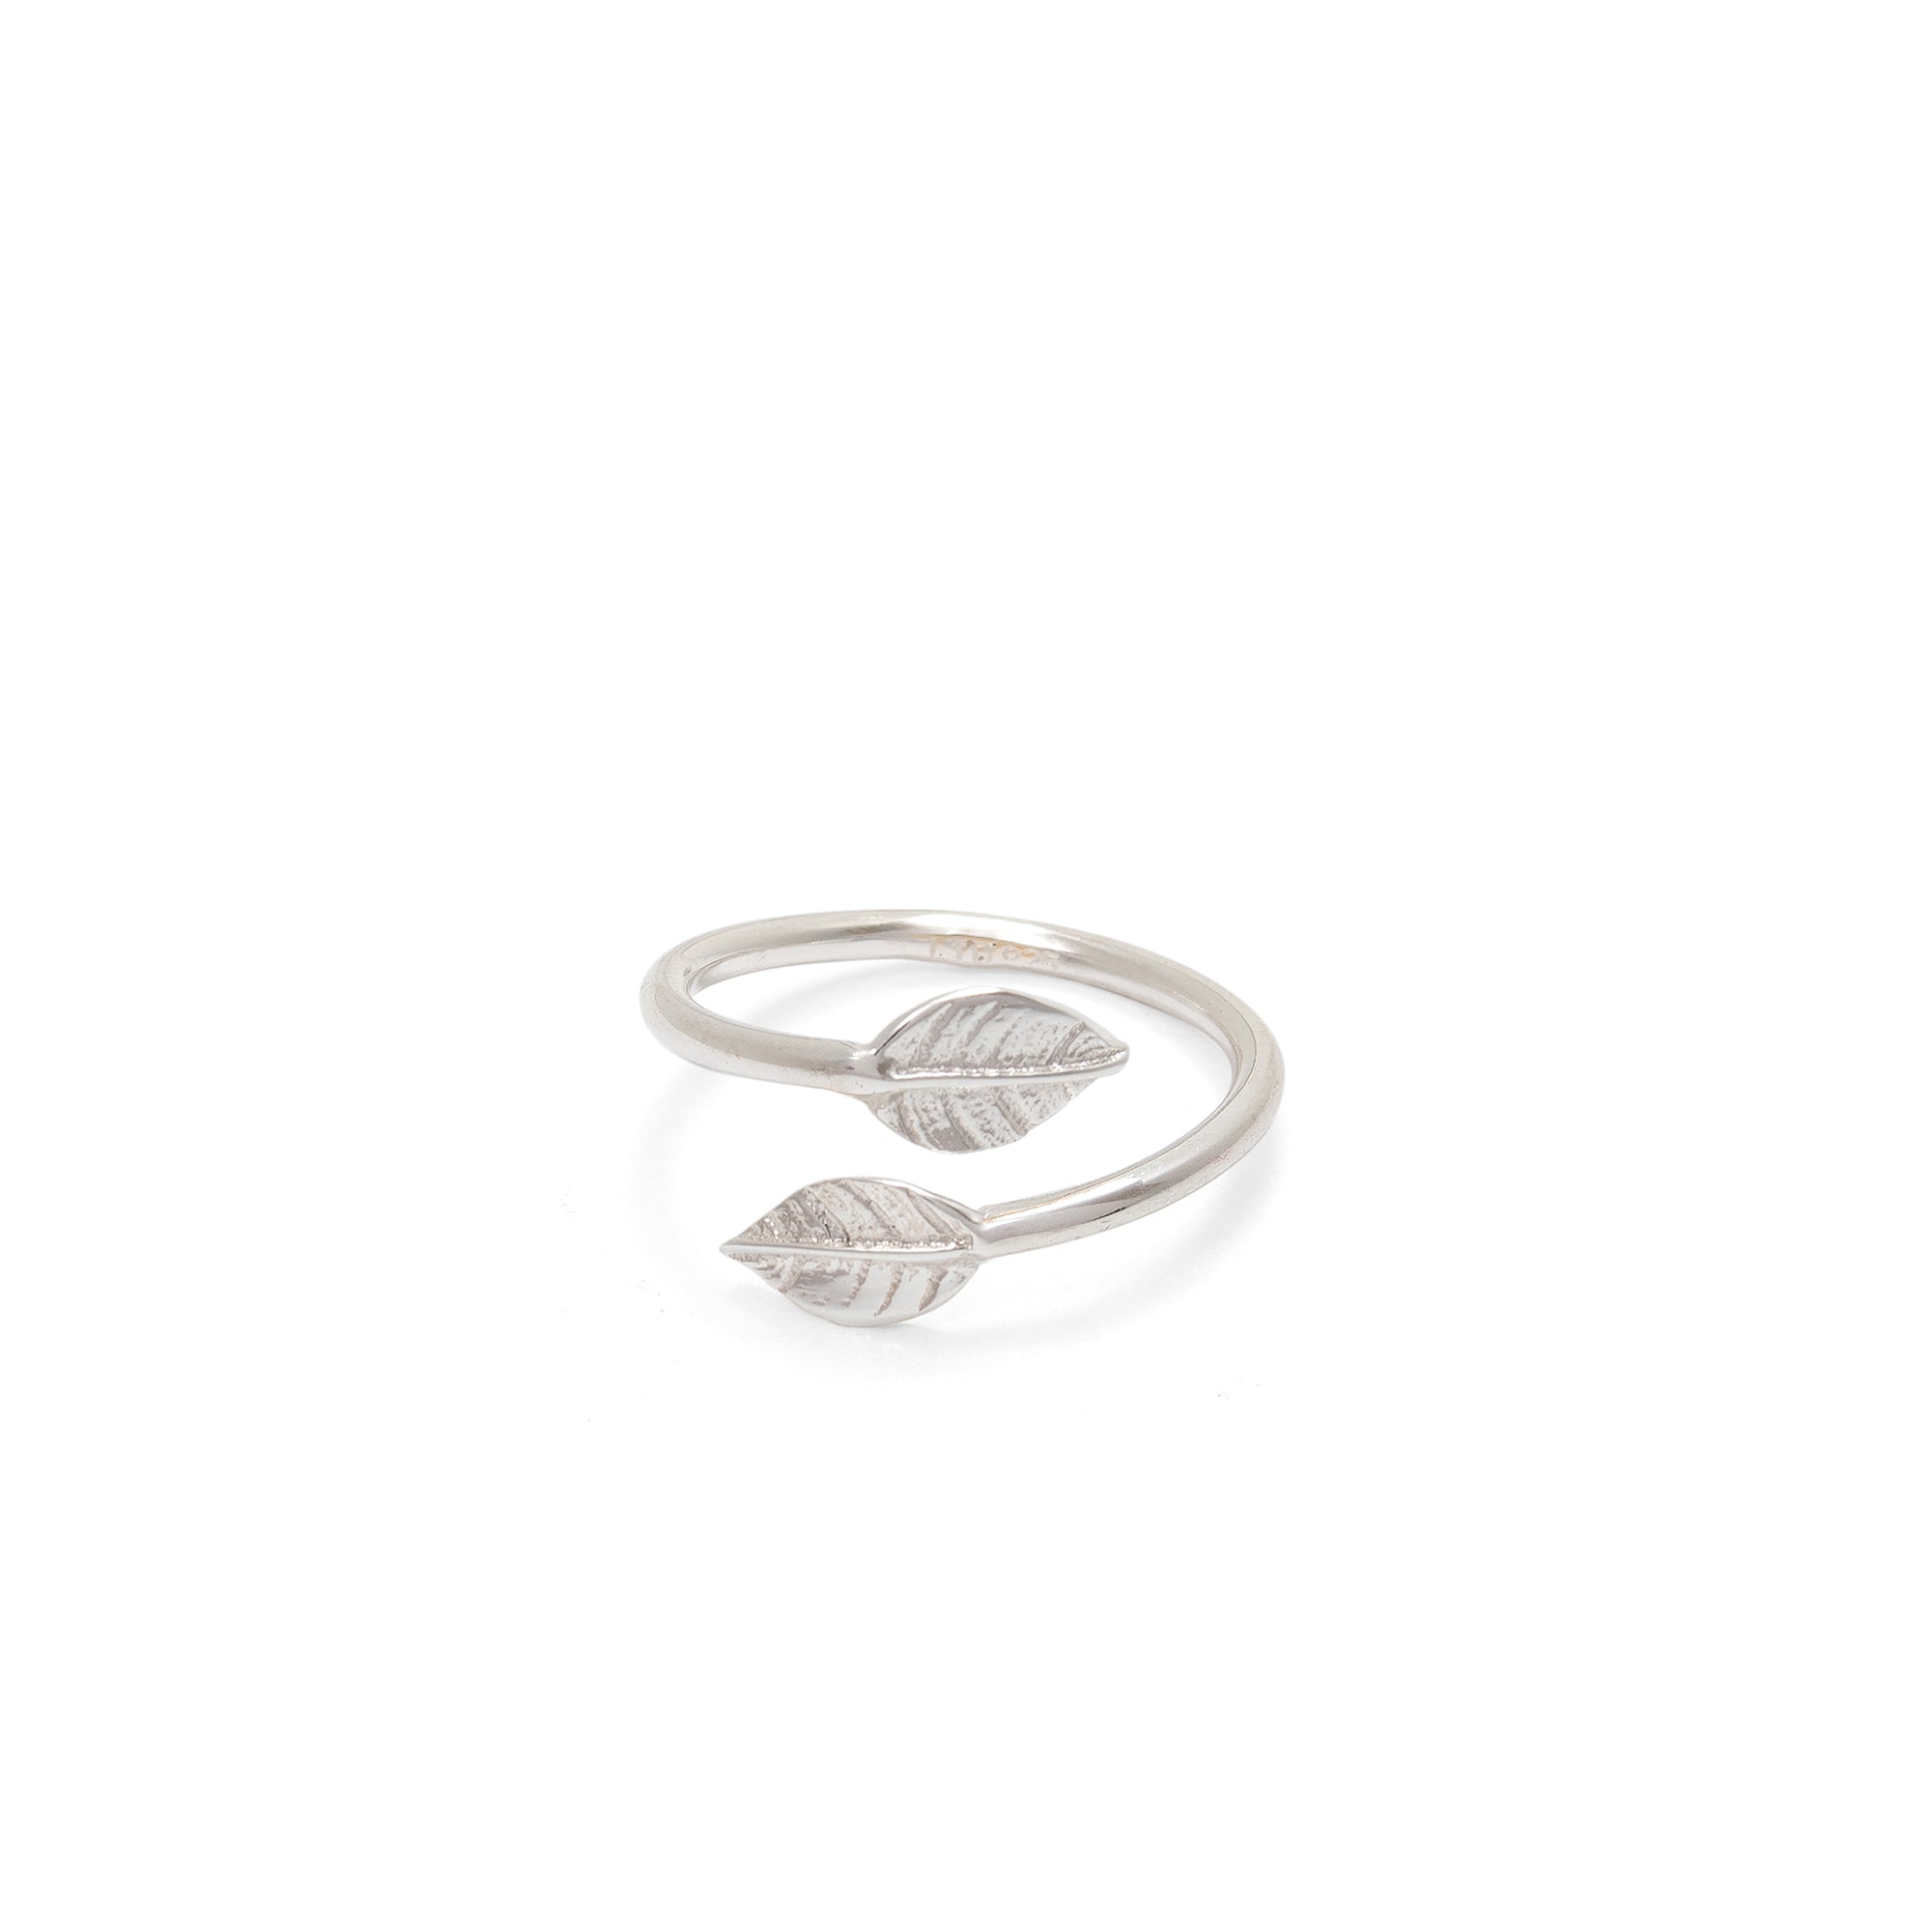 Adjustable Double Leaf Charm Ring Sterling Silver